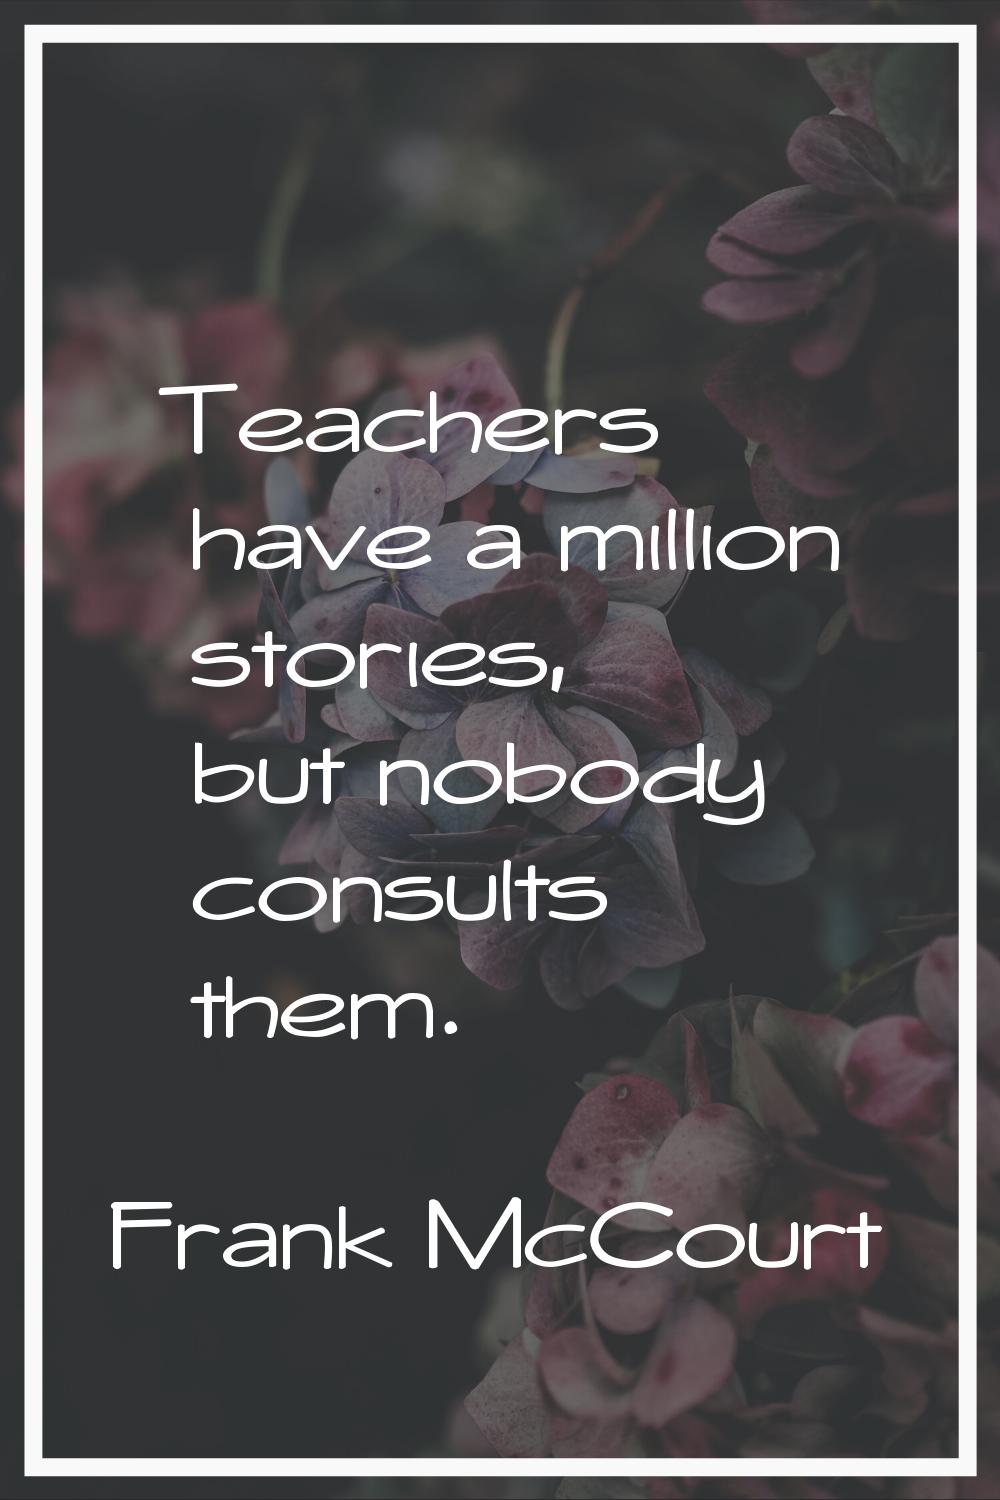 Teachers have a million stories, but nobody consults them.